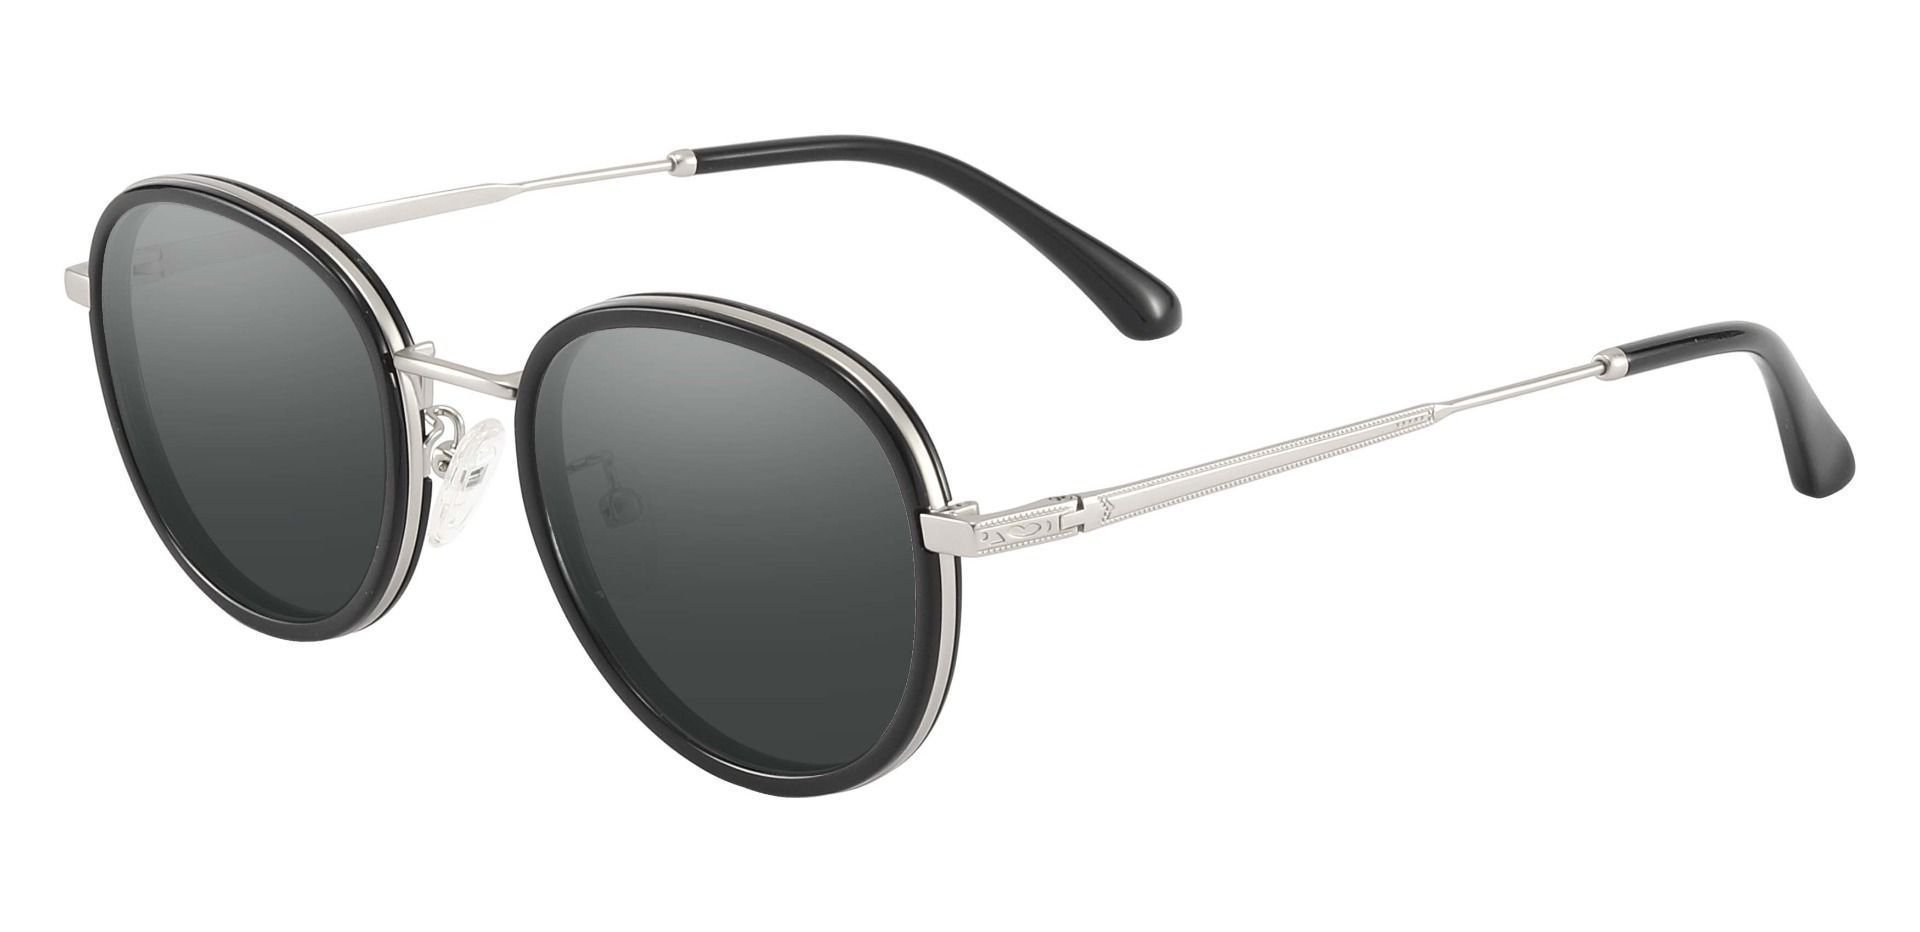 Edmore Oval Non-Rx Sunglasses - Black Frame With Gray Lenses